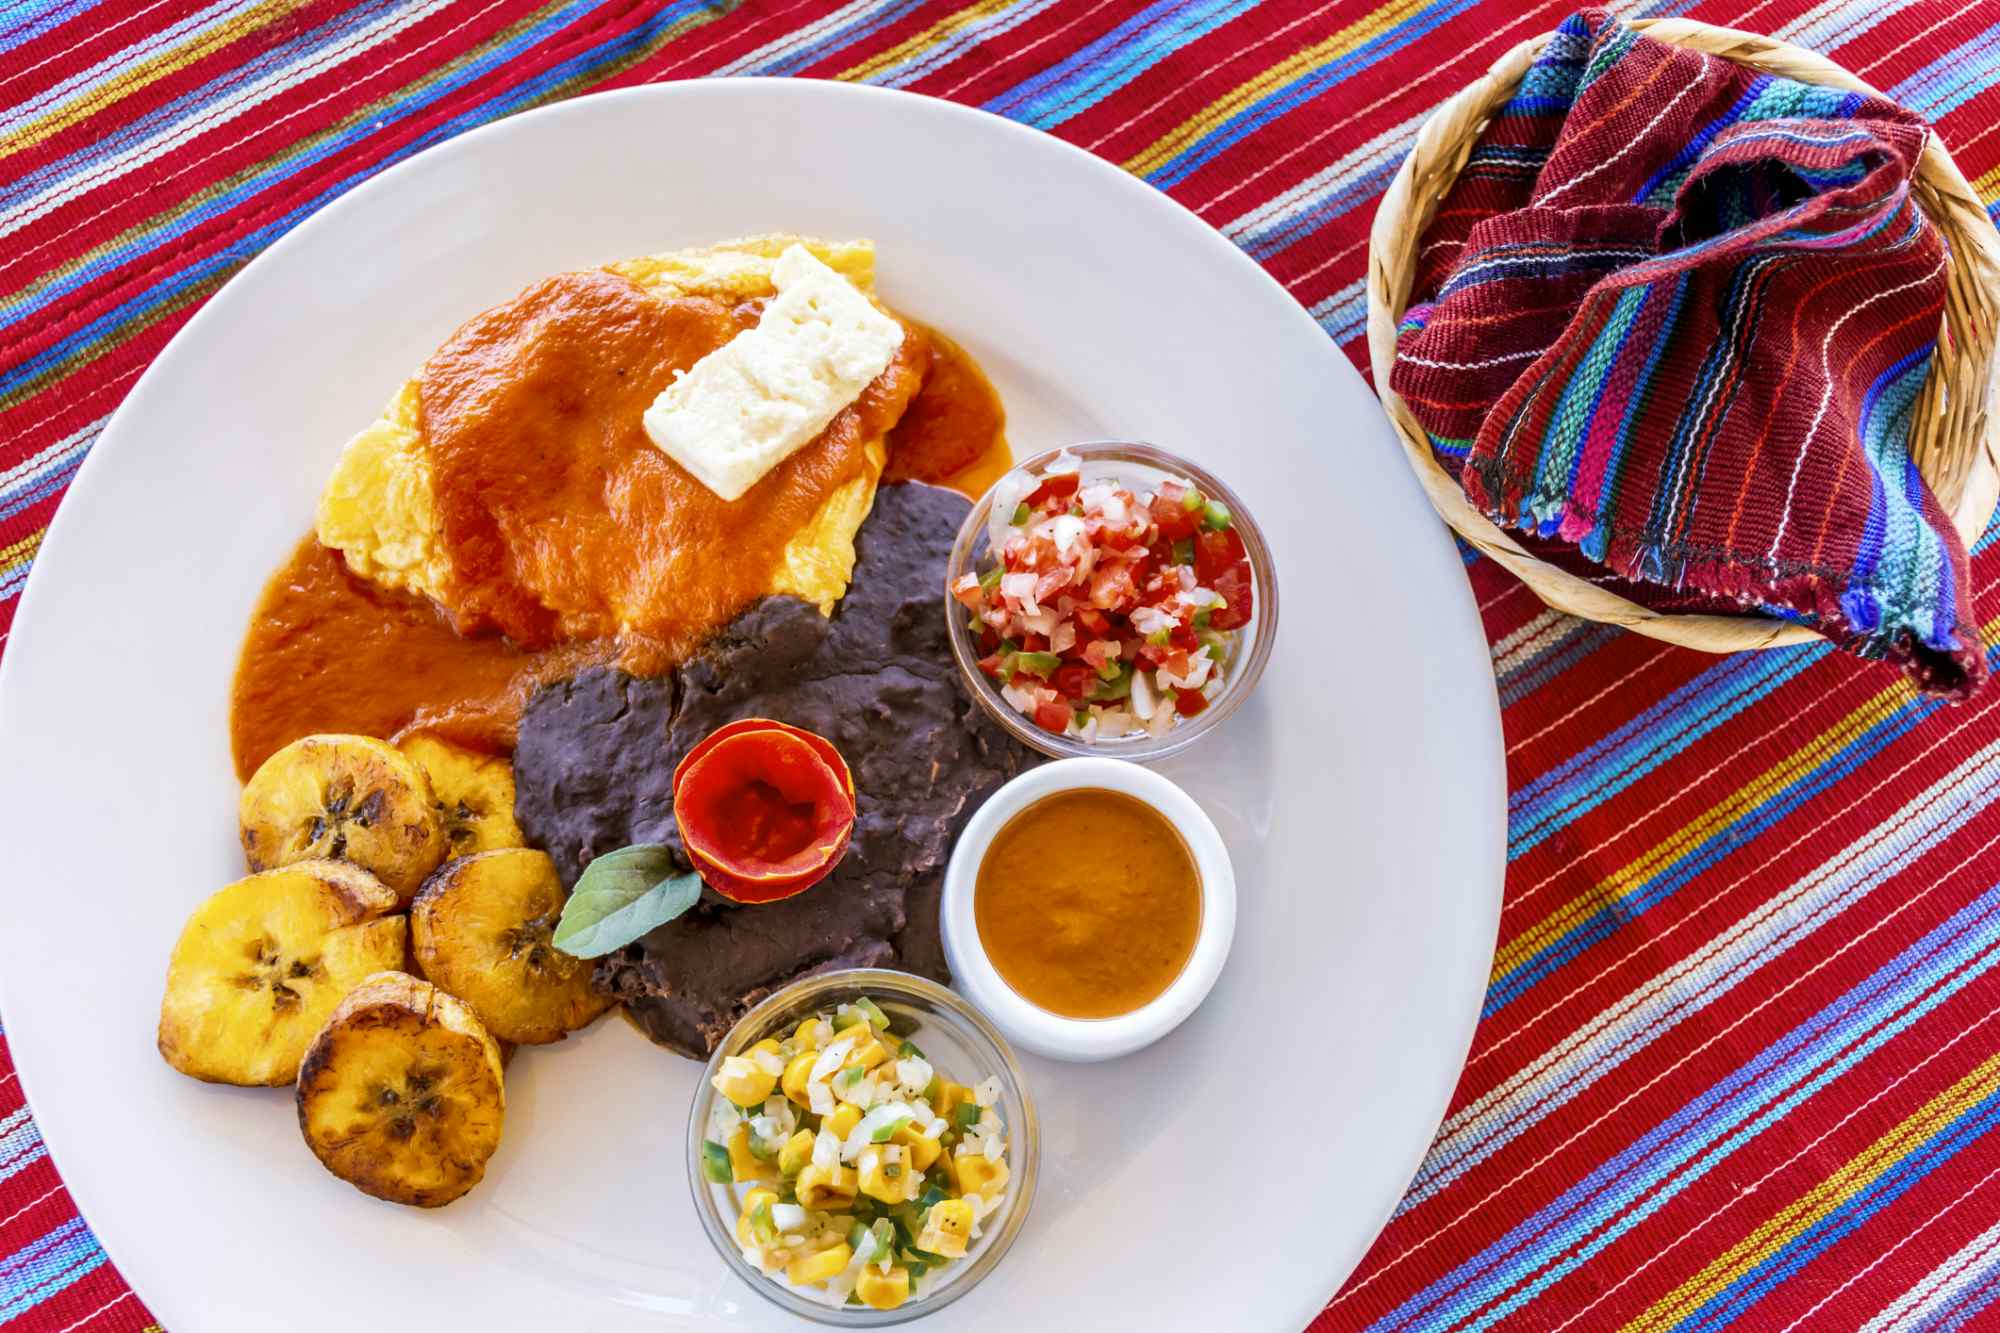 Traditional Guatemalan breakfast of eggs, black beans, cheese & fried plantain with tortillas wrapped in basket on handwoven Maya textile.